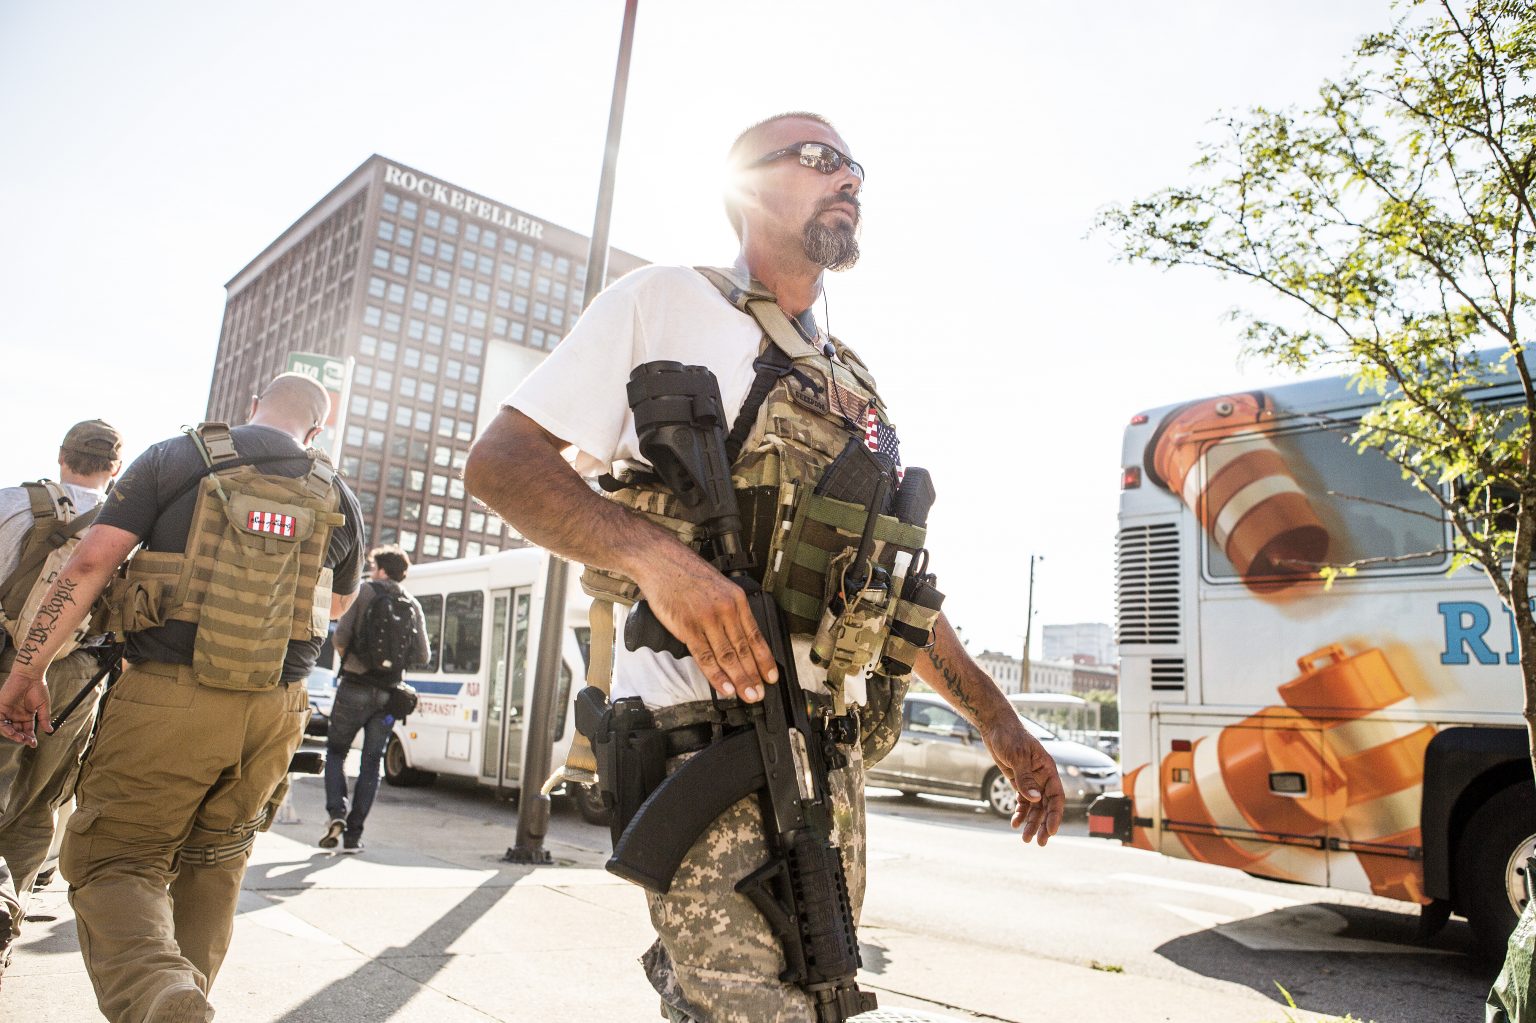 ‘Because We Are Free' Open Carry At the RNC, In Photos